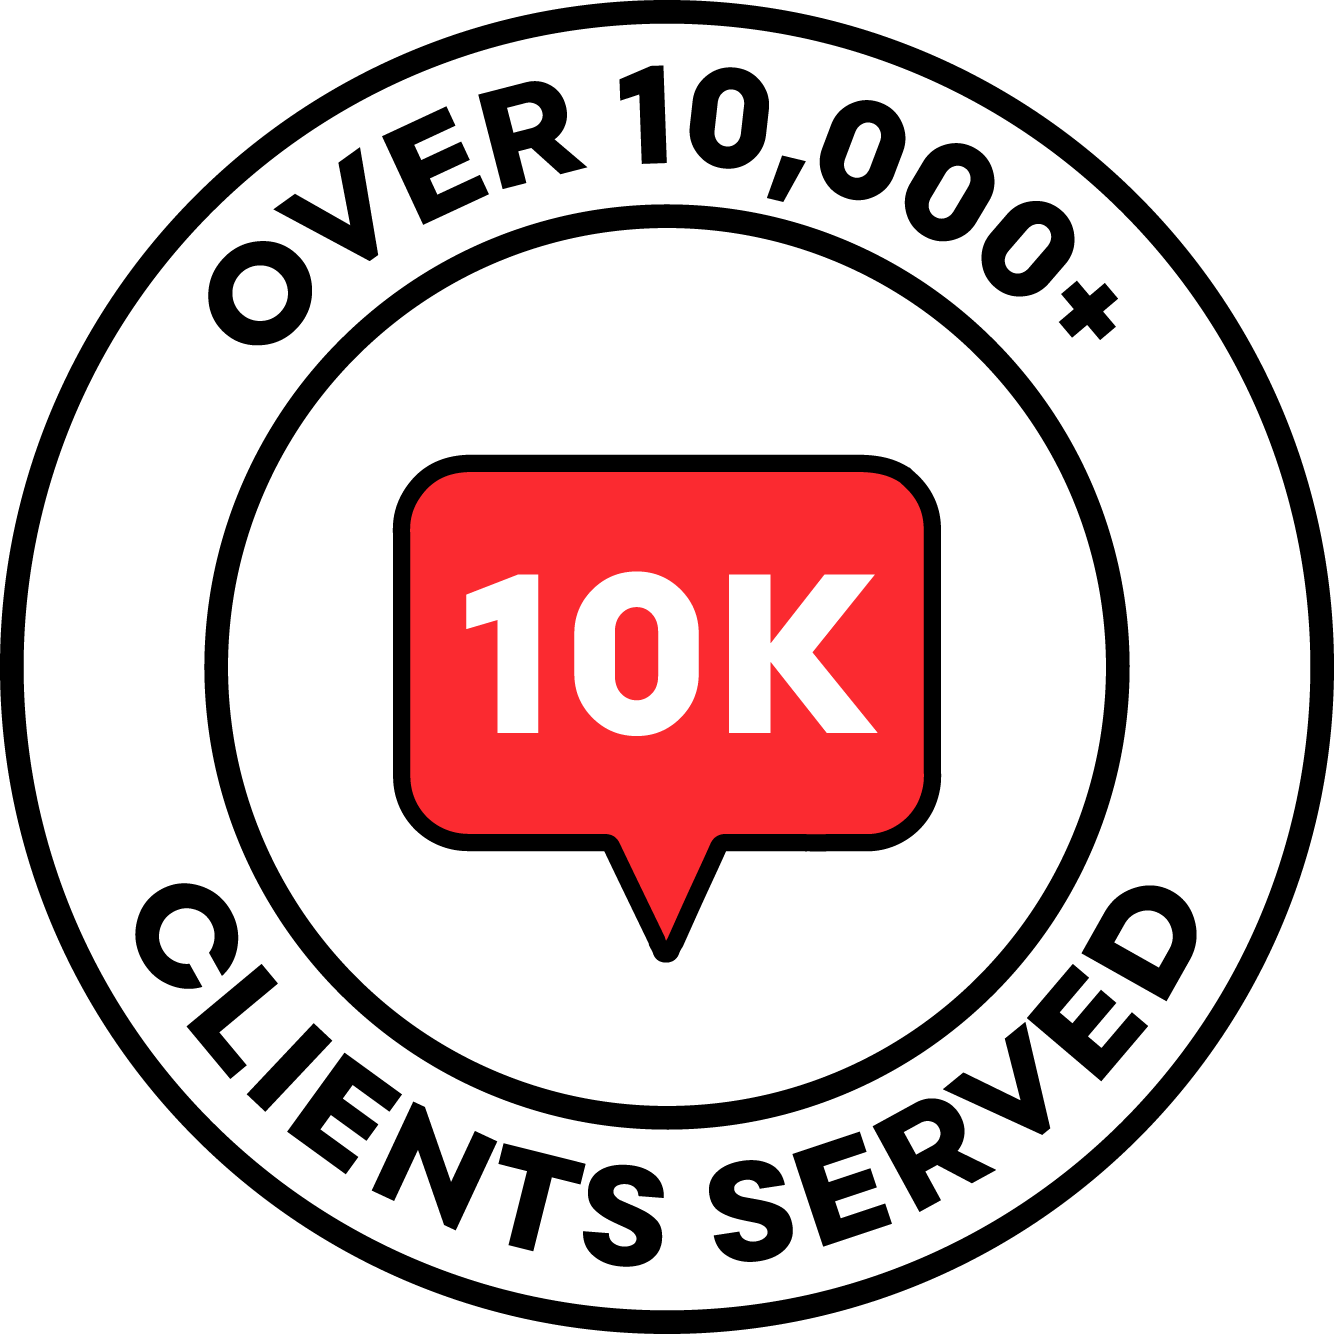 10k (1).png